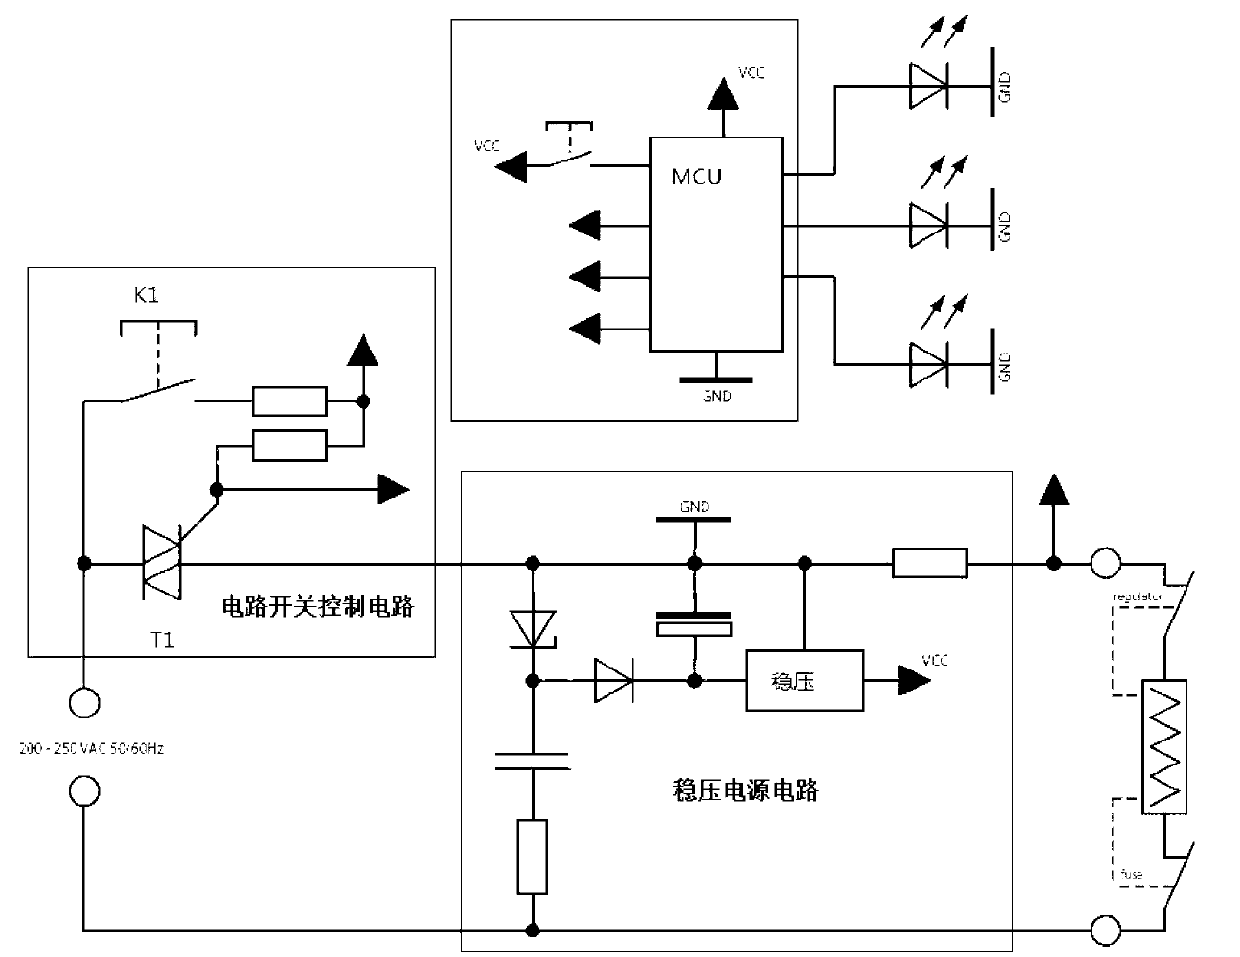 Switching circuit free of standby power consumption